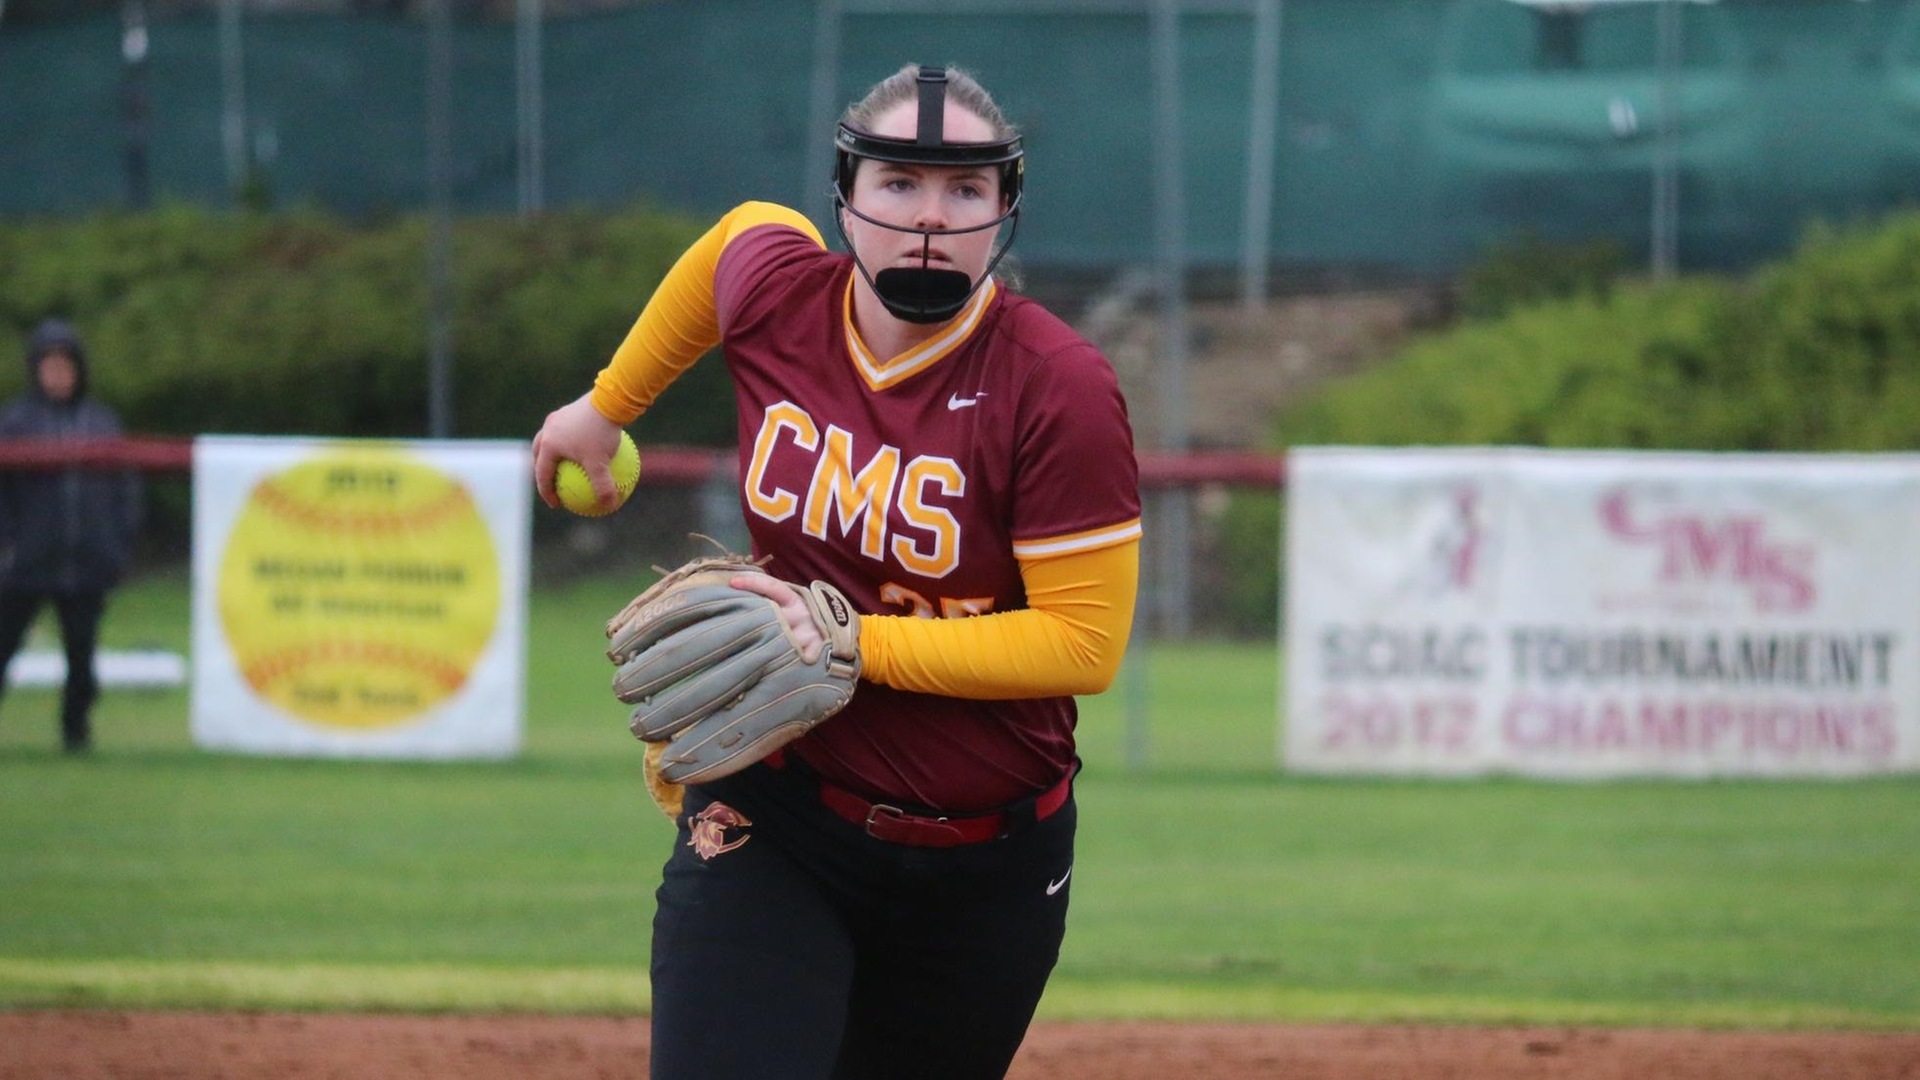 Maya Loper threw 6 shutout innings in the series finale with Chapman